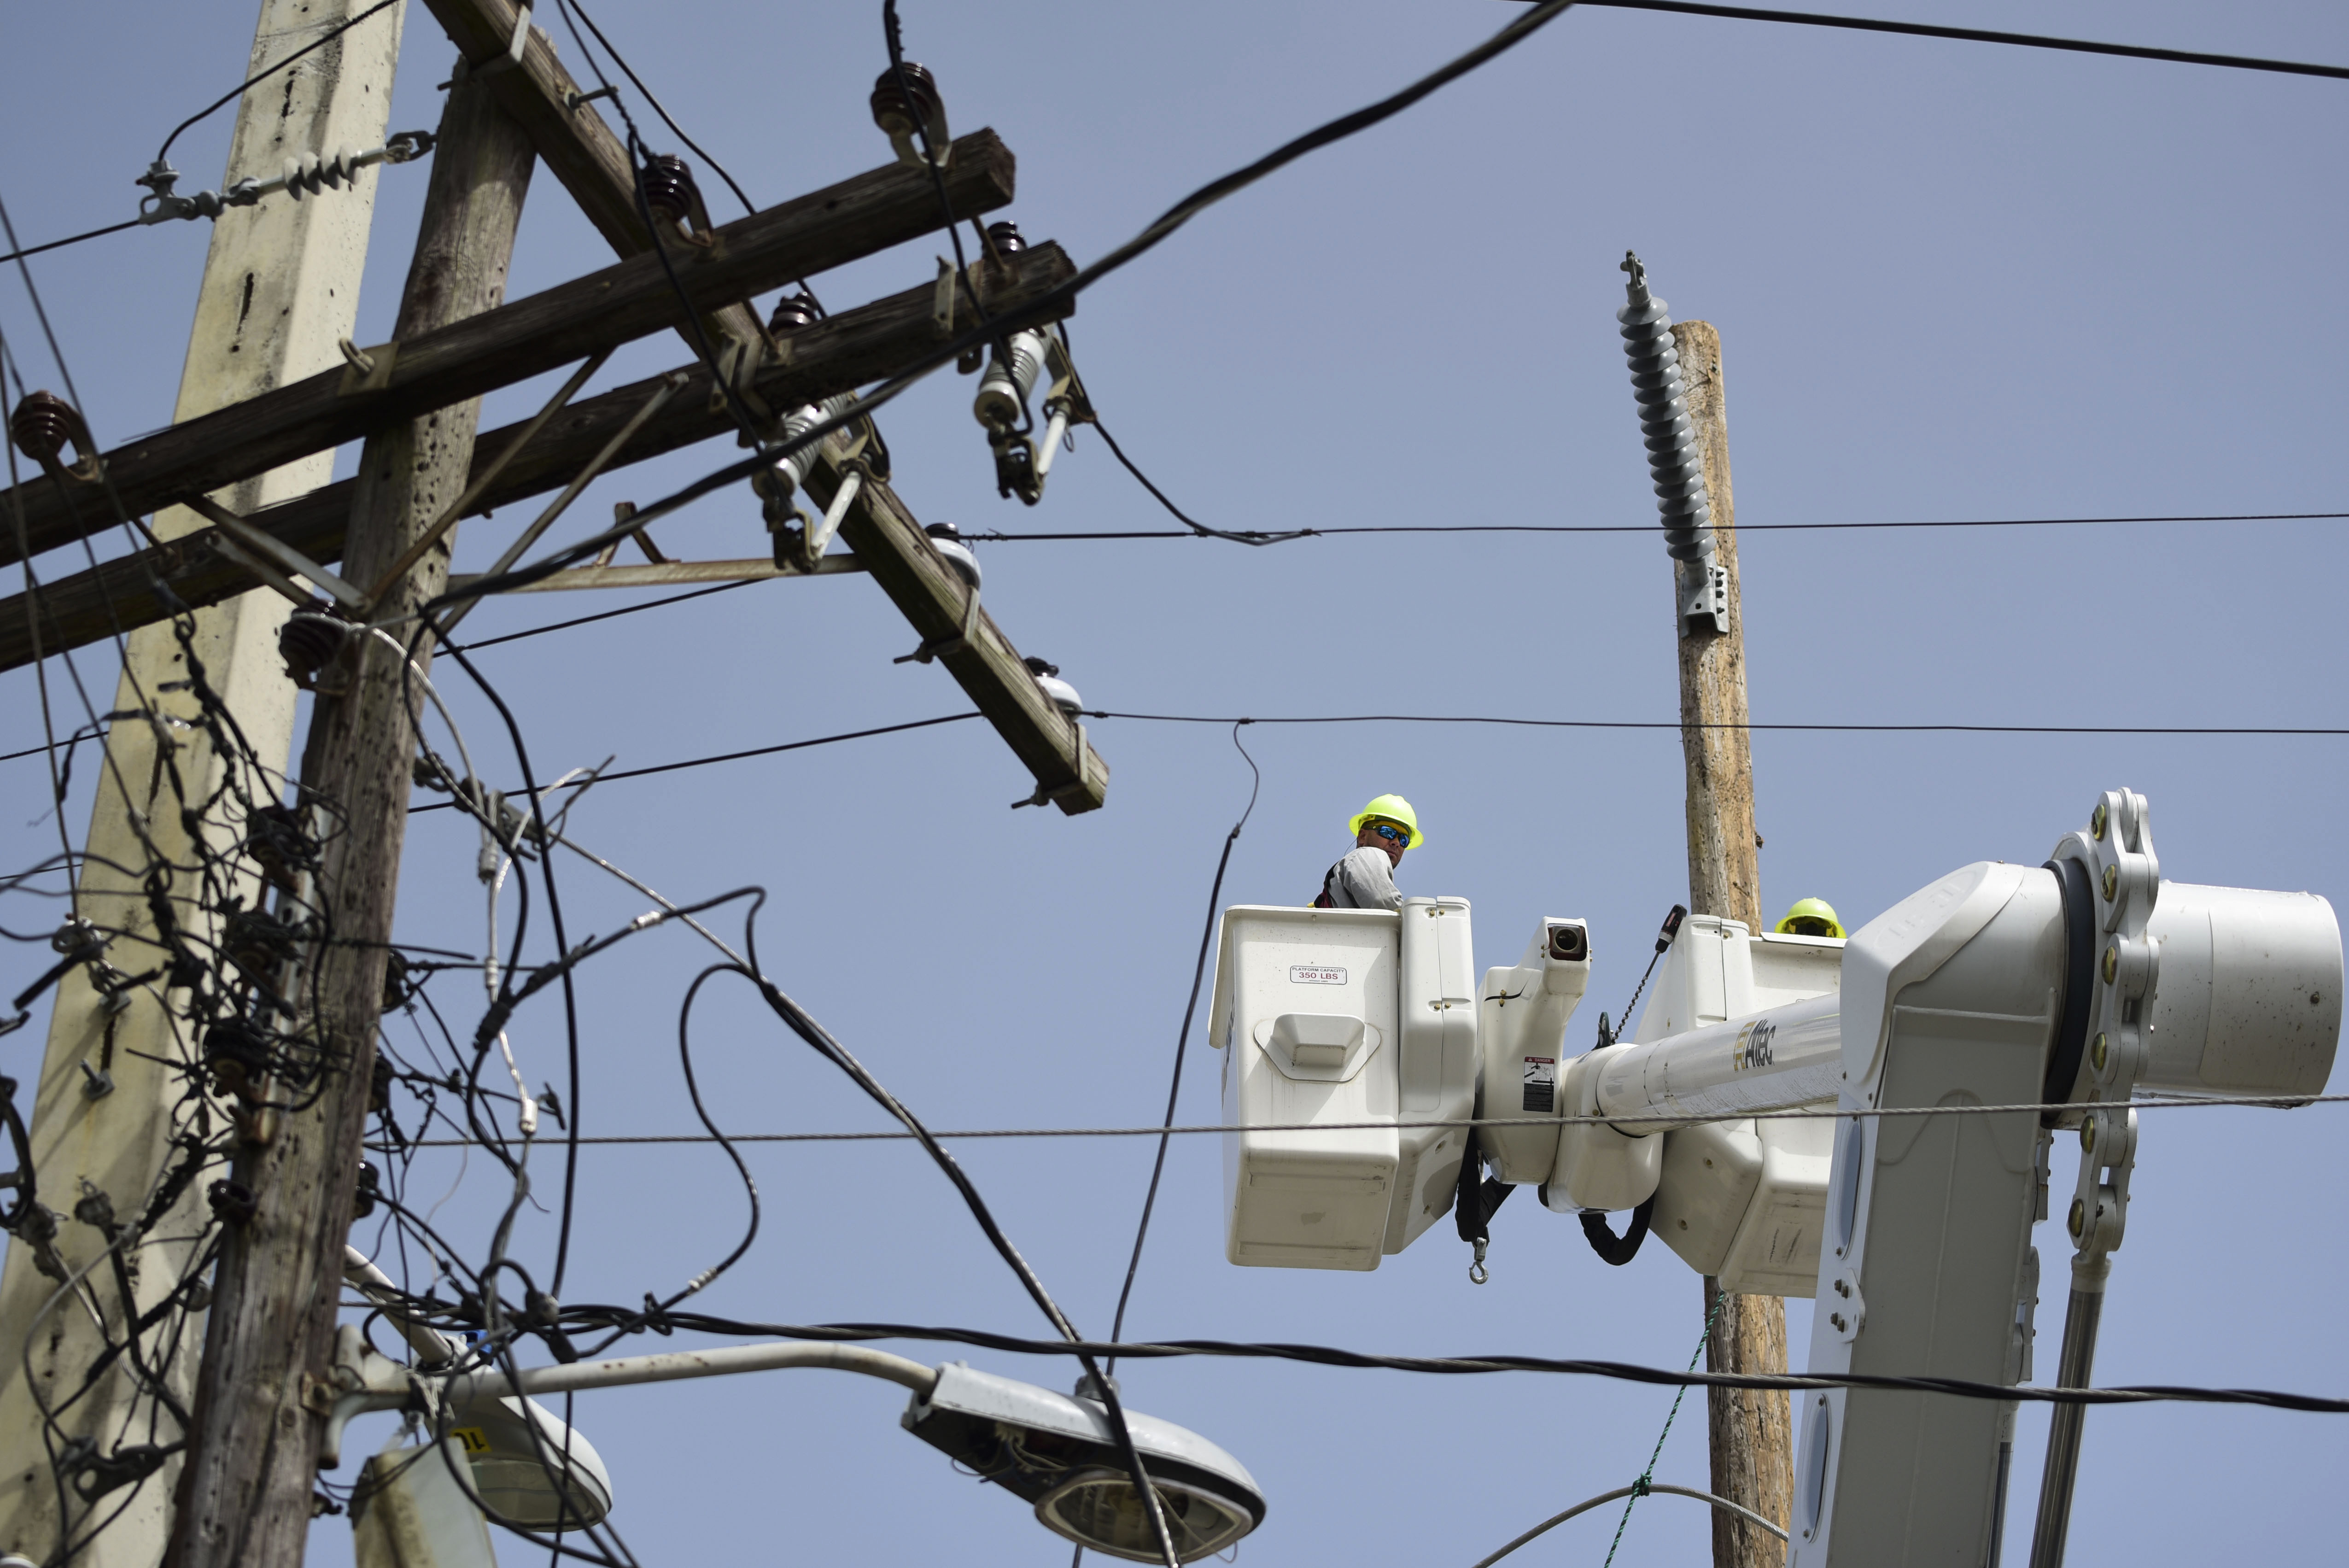 FILE - A brigade from the Electric Power Authority repairs distribution lines damaged by Hurricane Maria in the Cantera community of San Juan, Puerto Rico, Oct. 19, 2017. A federal judge overseeing a drawn-out debt-restructuring process for the power company ordered all parties to mediation on Wednesday, July 10, in the latest attempt to break an impasse that has sparked widespread anger and frustration. (AP Photo/Carlos Giusti, File)